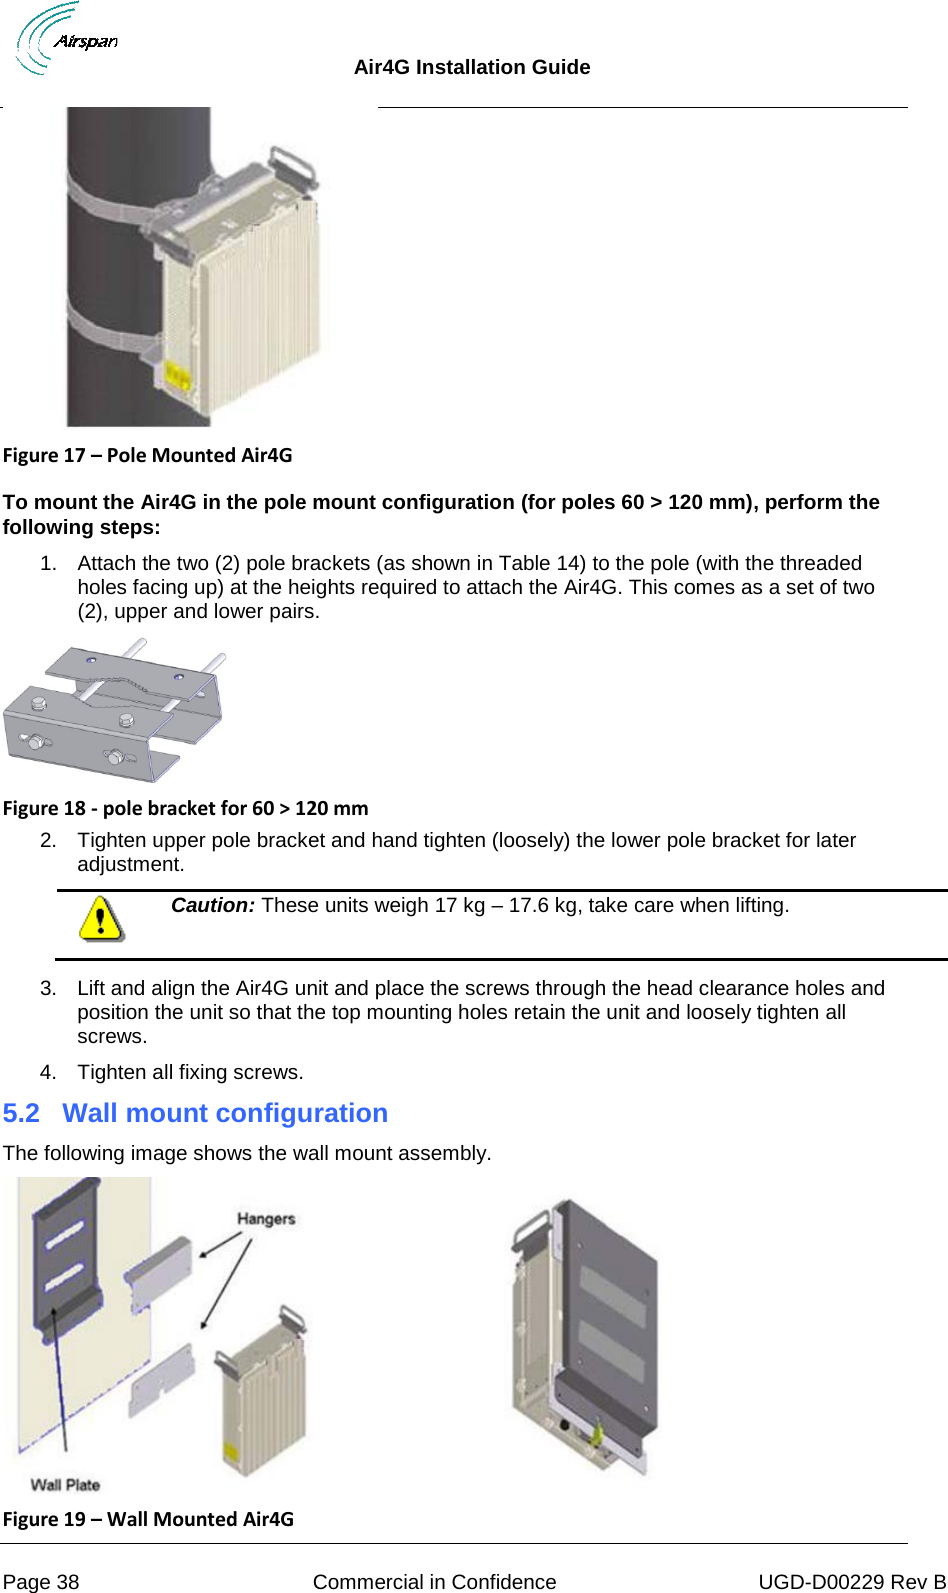  Air4G Installation Guide     Page 38 Commercial in Confidence UGD-D00229 Rev B  Figure 17 – Pole Mounted Air4G   To mount the Air4G in the pole mount configuration (for poles 60 &gt; 120 mm), perform the following steps: 1. Attach the two (2) pole brackets (as shown in Table 14) to the pole (with the threaded holes facing up) at the heights required to attach the Air4G. This comes as a set of two (2), upper and lower pairs.  Figure 18 - pole bracket for 60 &gt; 120 mm 2. Tighten upper pole bracket and hand tighten (loosely) the lower pole bracket for later adjustment.  Caution: These units weigh 17 kg – 17.6 kg, take care when lifting.  3. Lift and align the Air4G unit and place the screws through the head clearance holes and position the unit so that the top mounting holes retain the unit and loosely tighten all screws. 4. Tighten all fixing screws. 5.2 Wall mount configuration The following image shows the wall mount assembly.  Figure 19 – Wall Mounted Air4G  